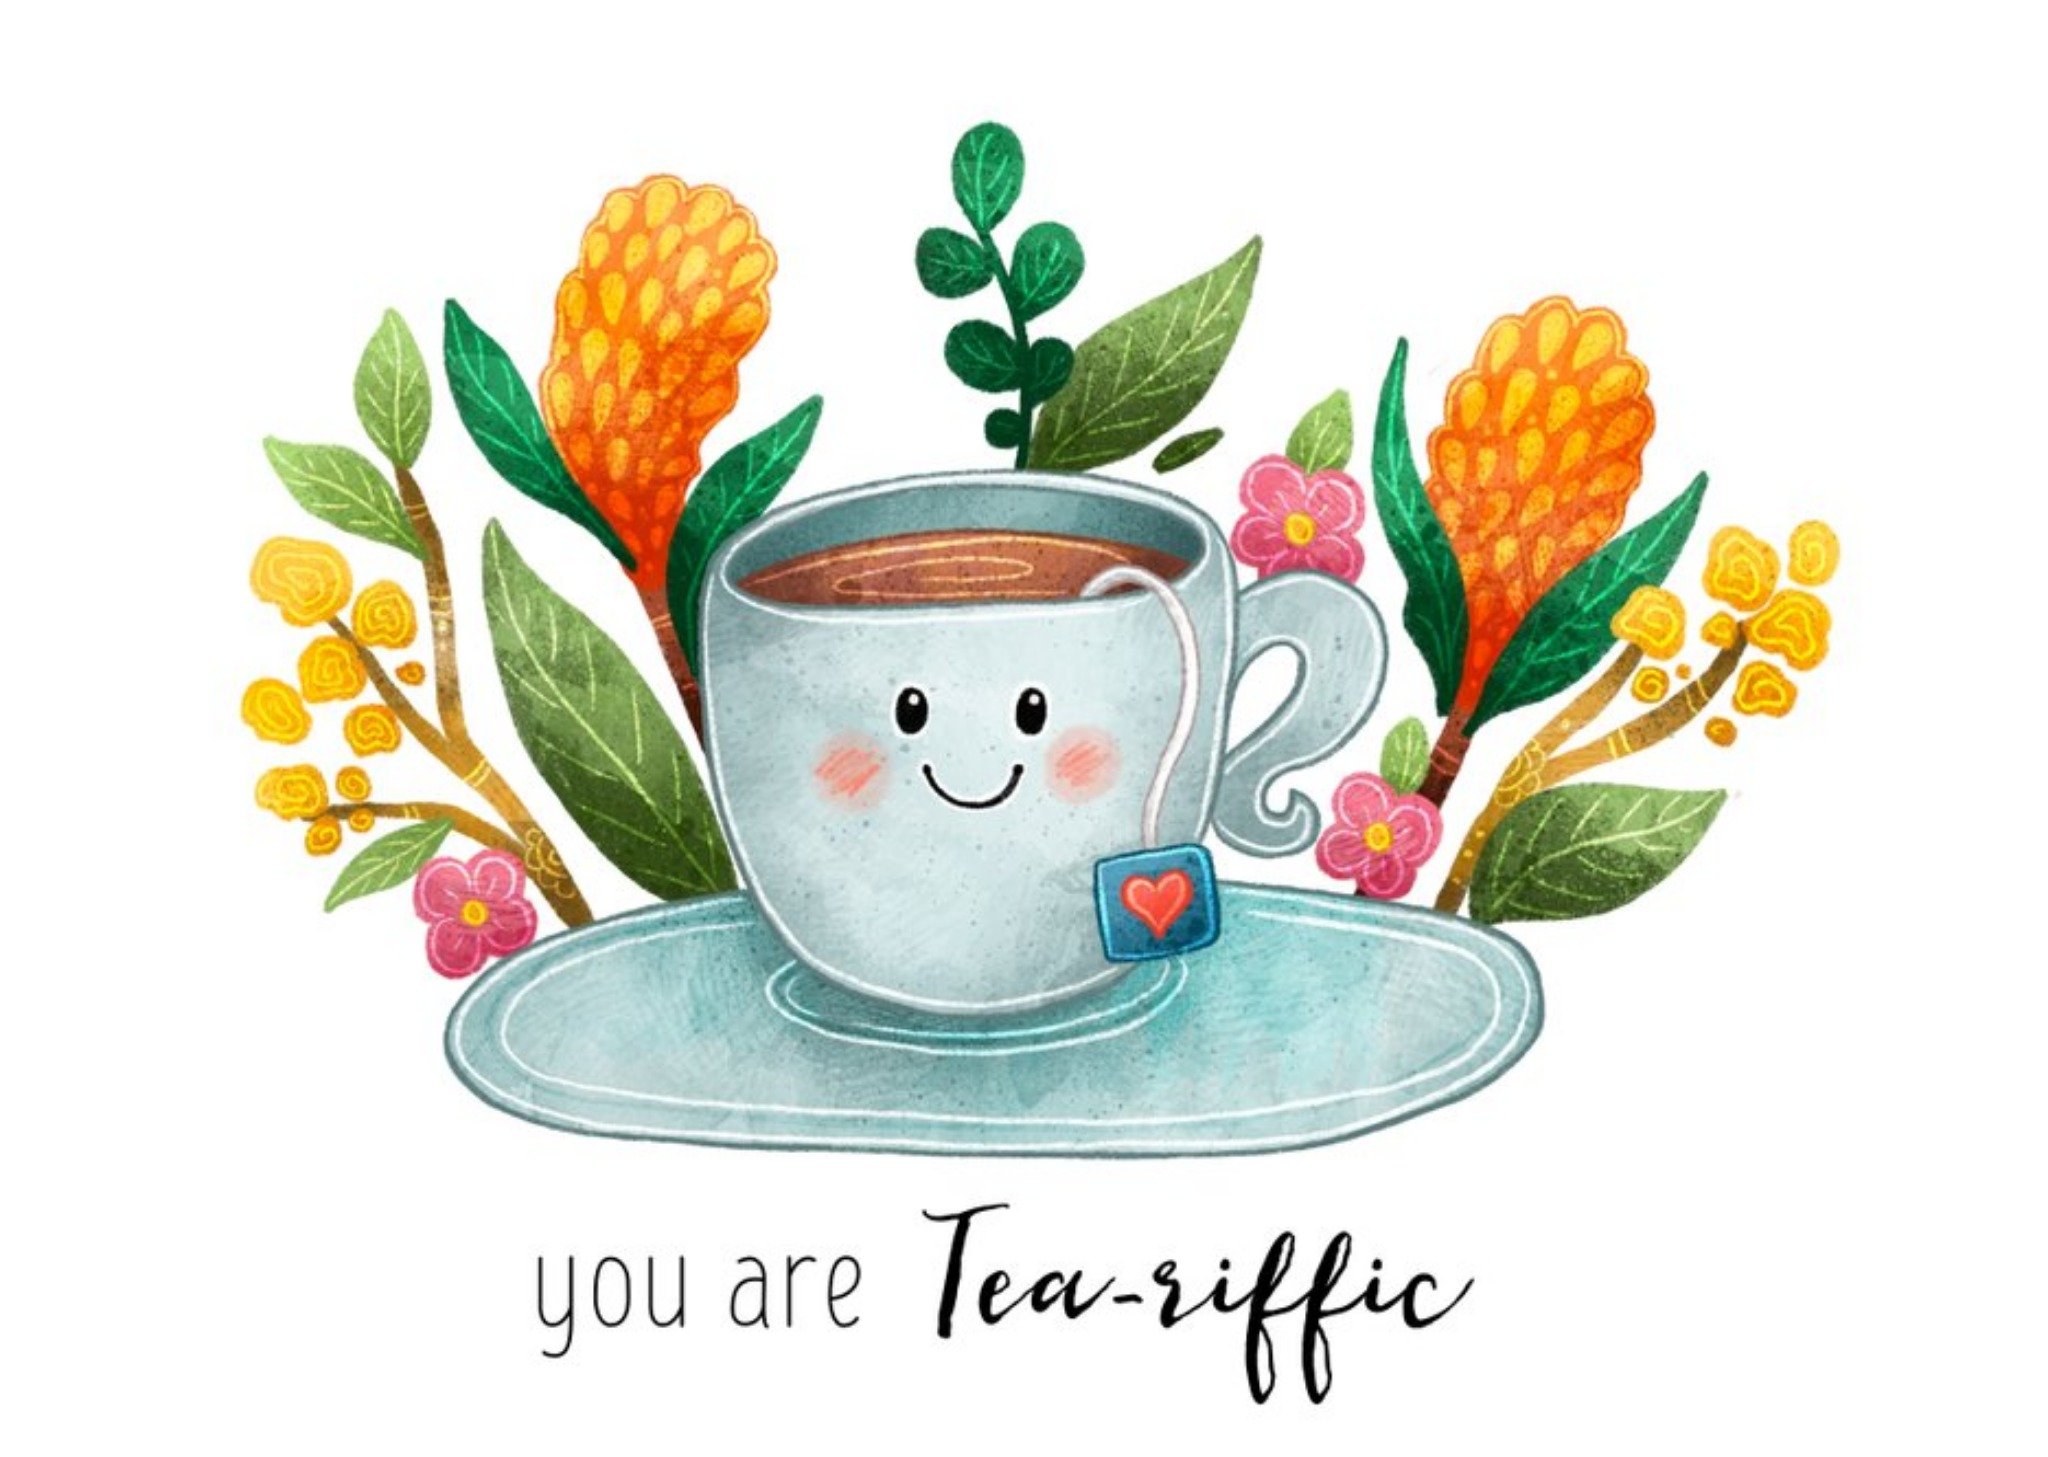 Moonpig Illustration Of A Smiling Teacup Surrounded By Flowers You Are Tea Riffic Card Ecard